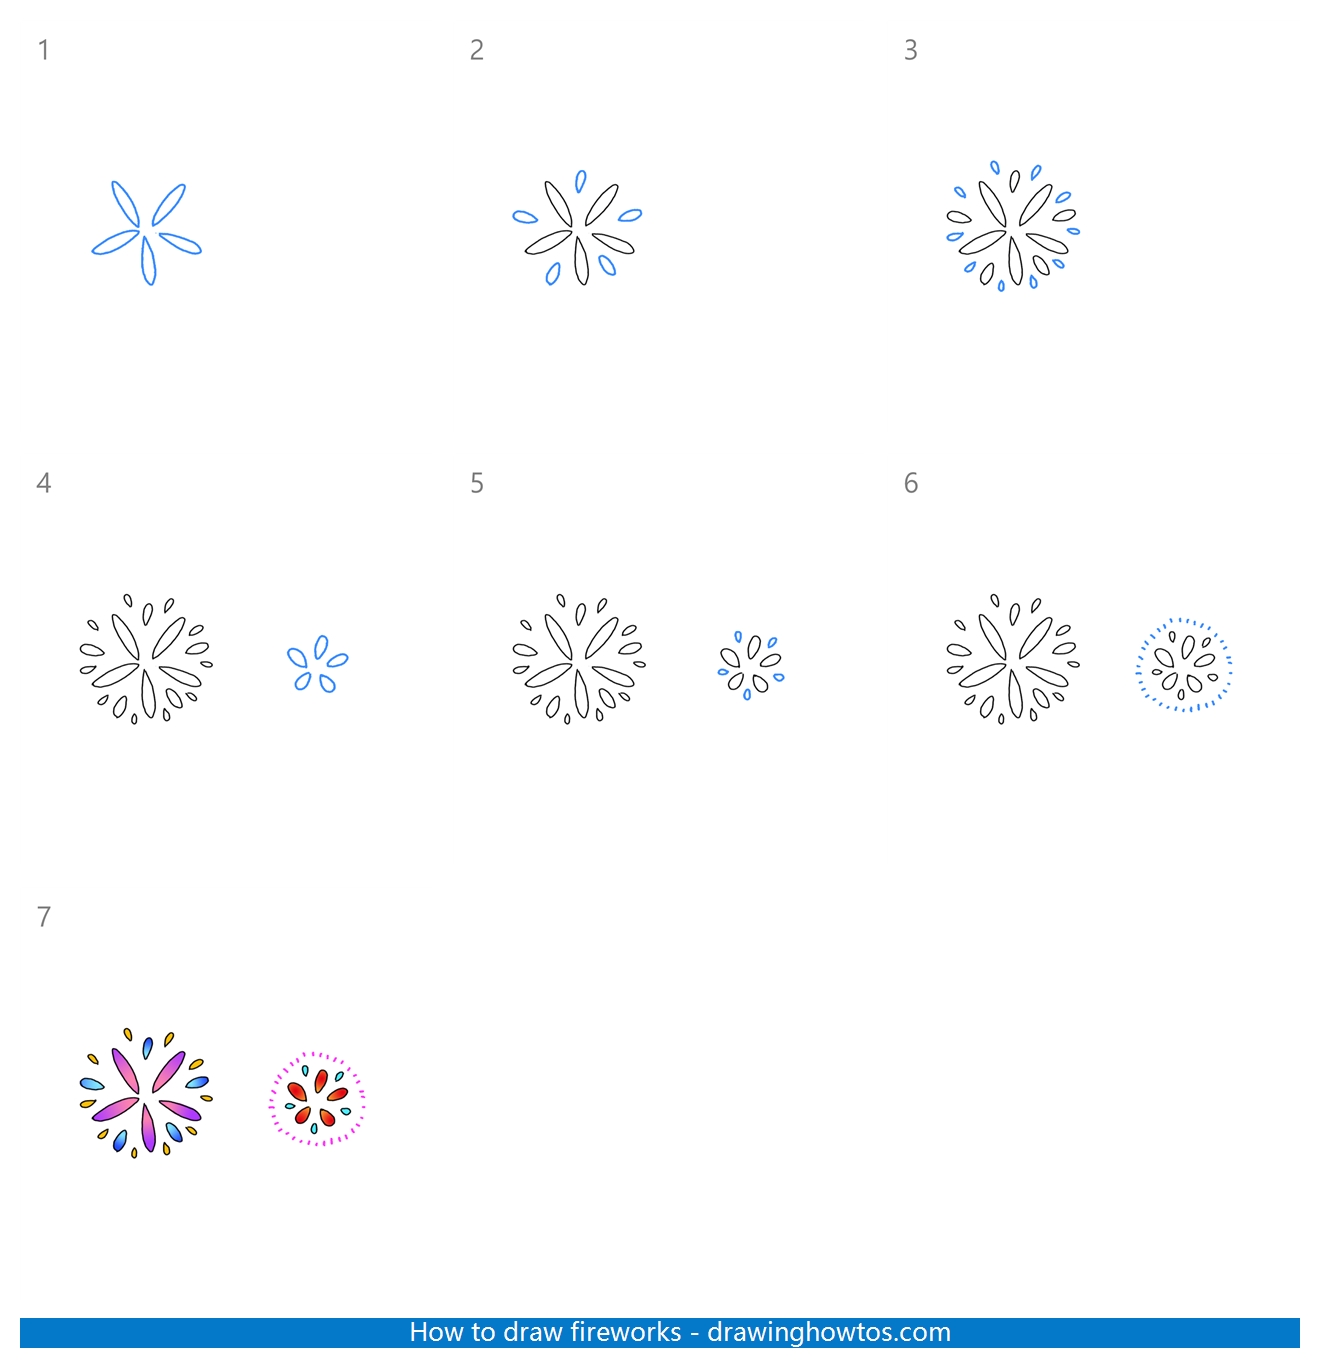 How to Draw Fireworks Step by Step